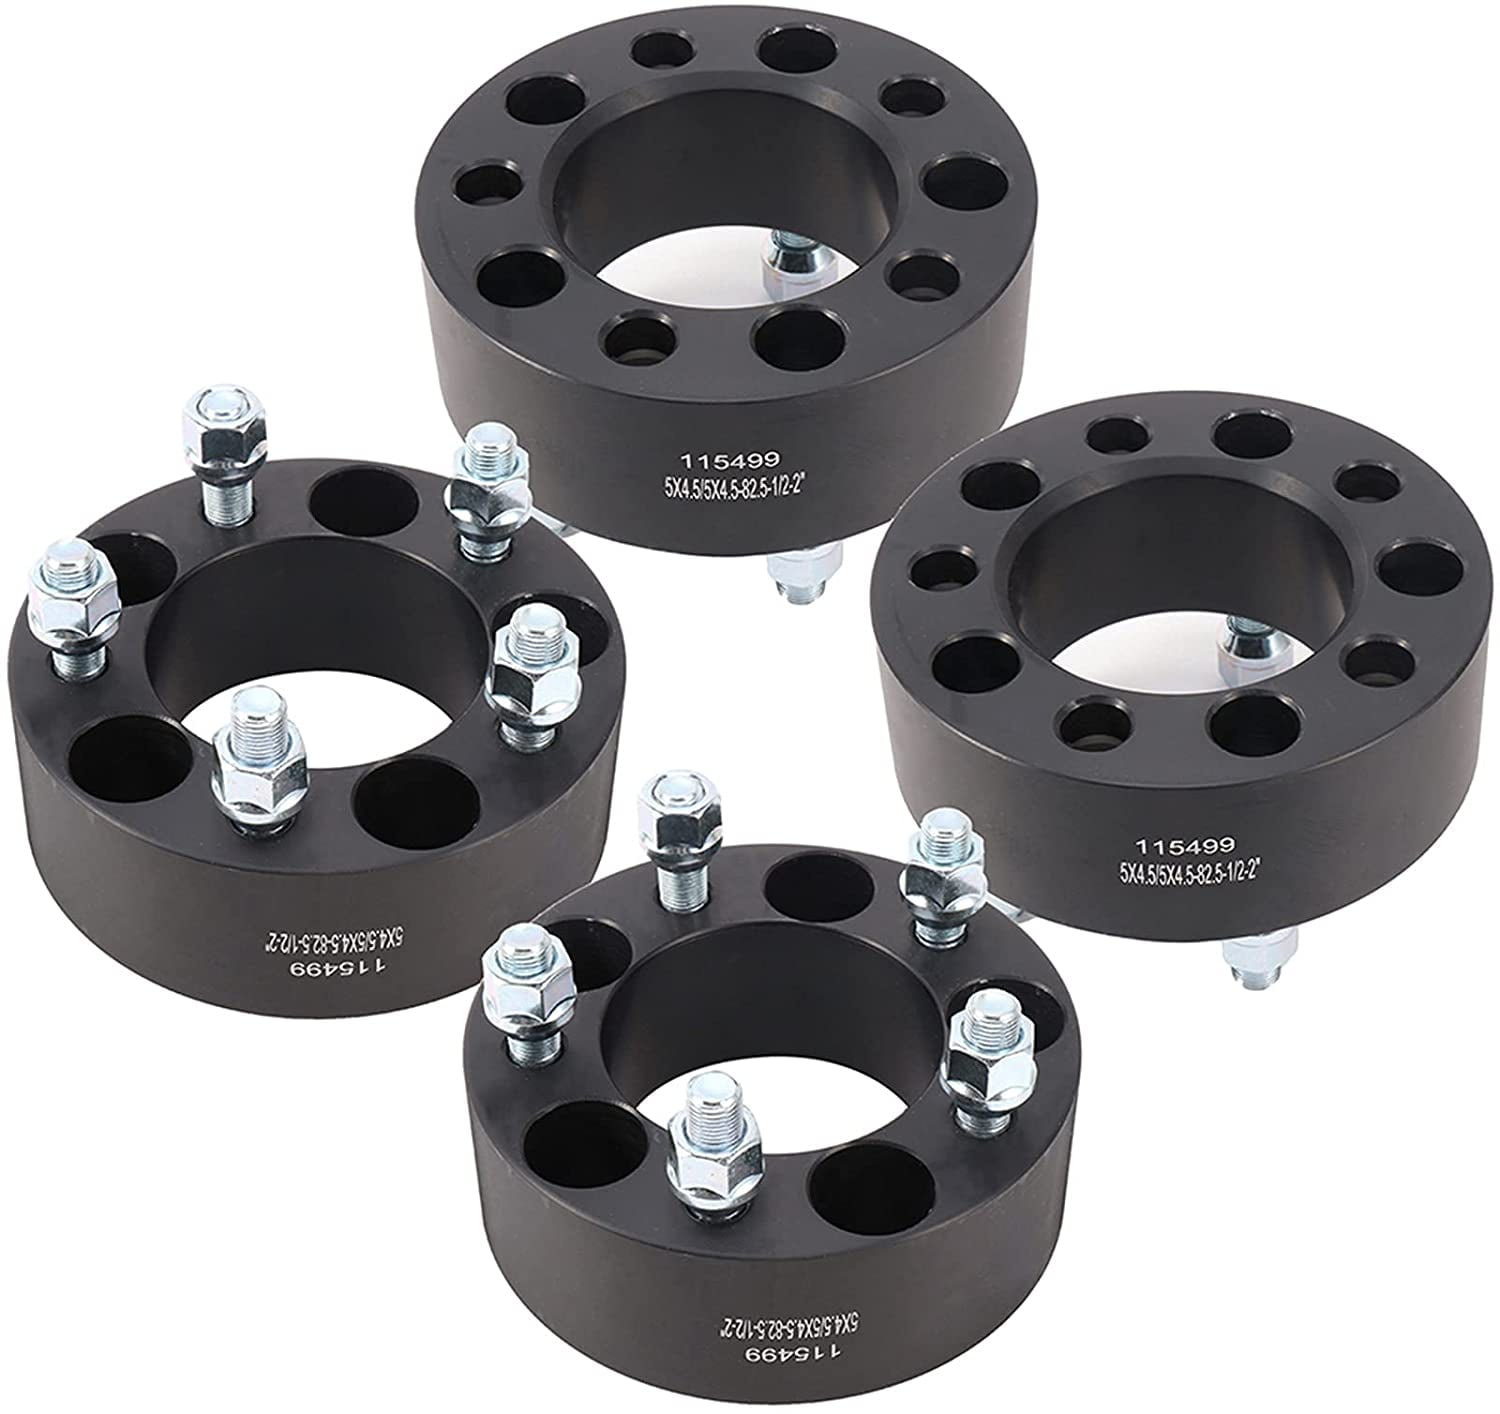 2 WHEEL ADAPTERS WHEEL SPACERS 5x4.5 TO 5x4.75 50MM THICK 82.5MM CB 12X1.5 